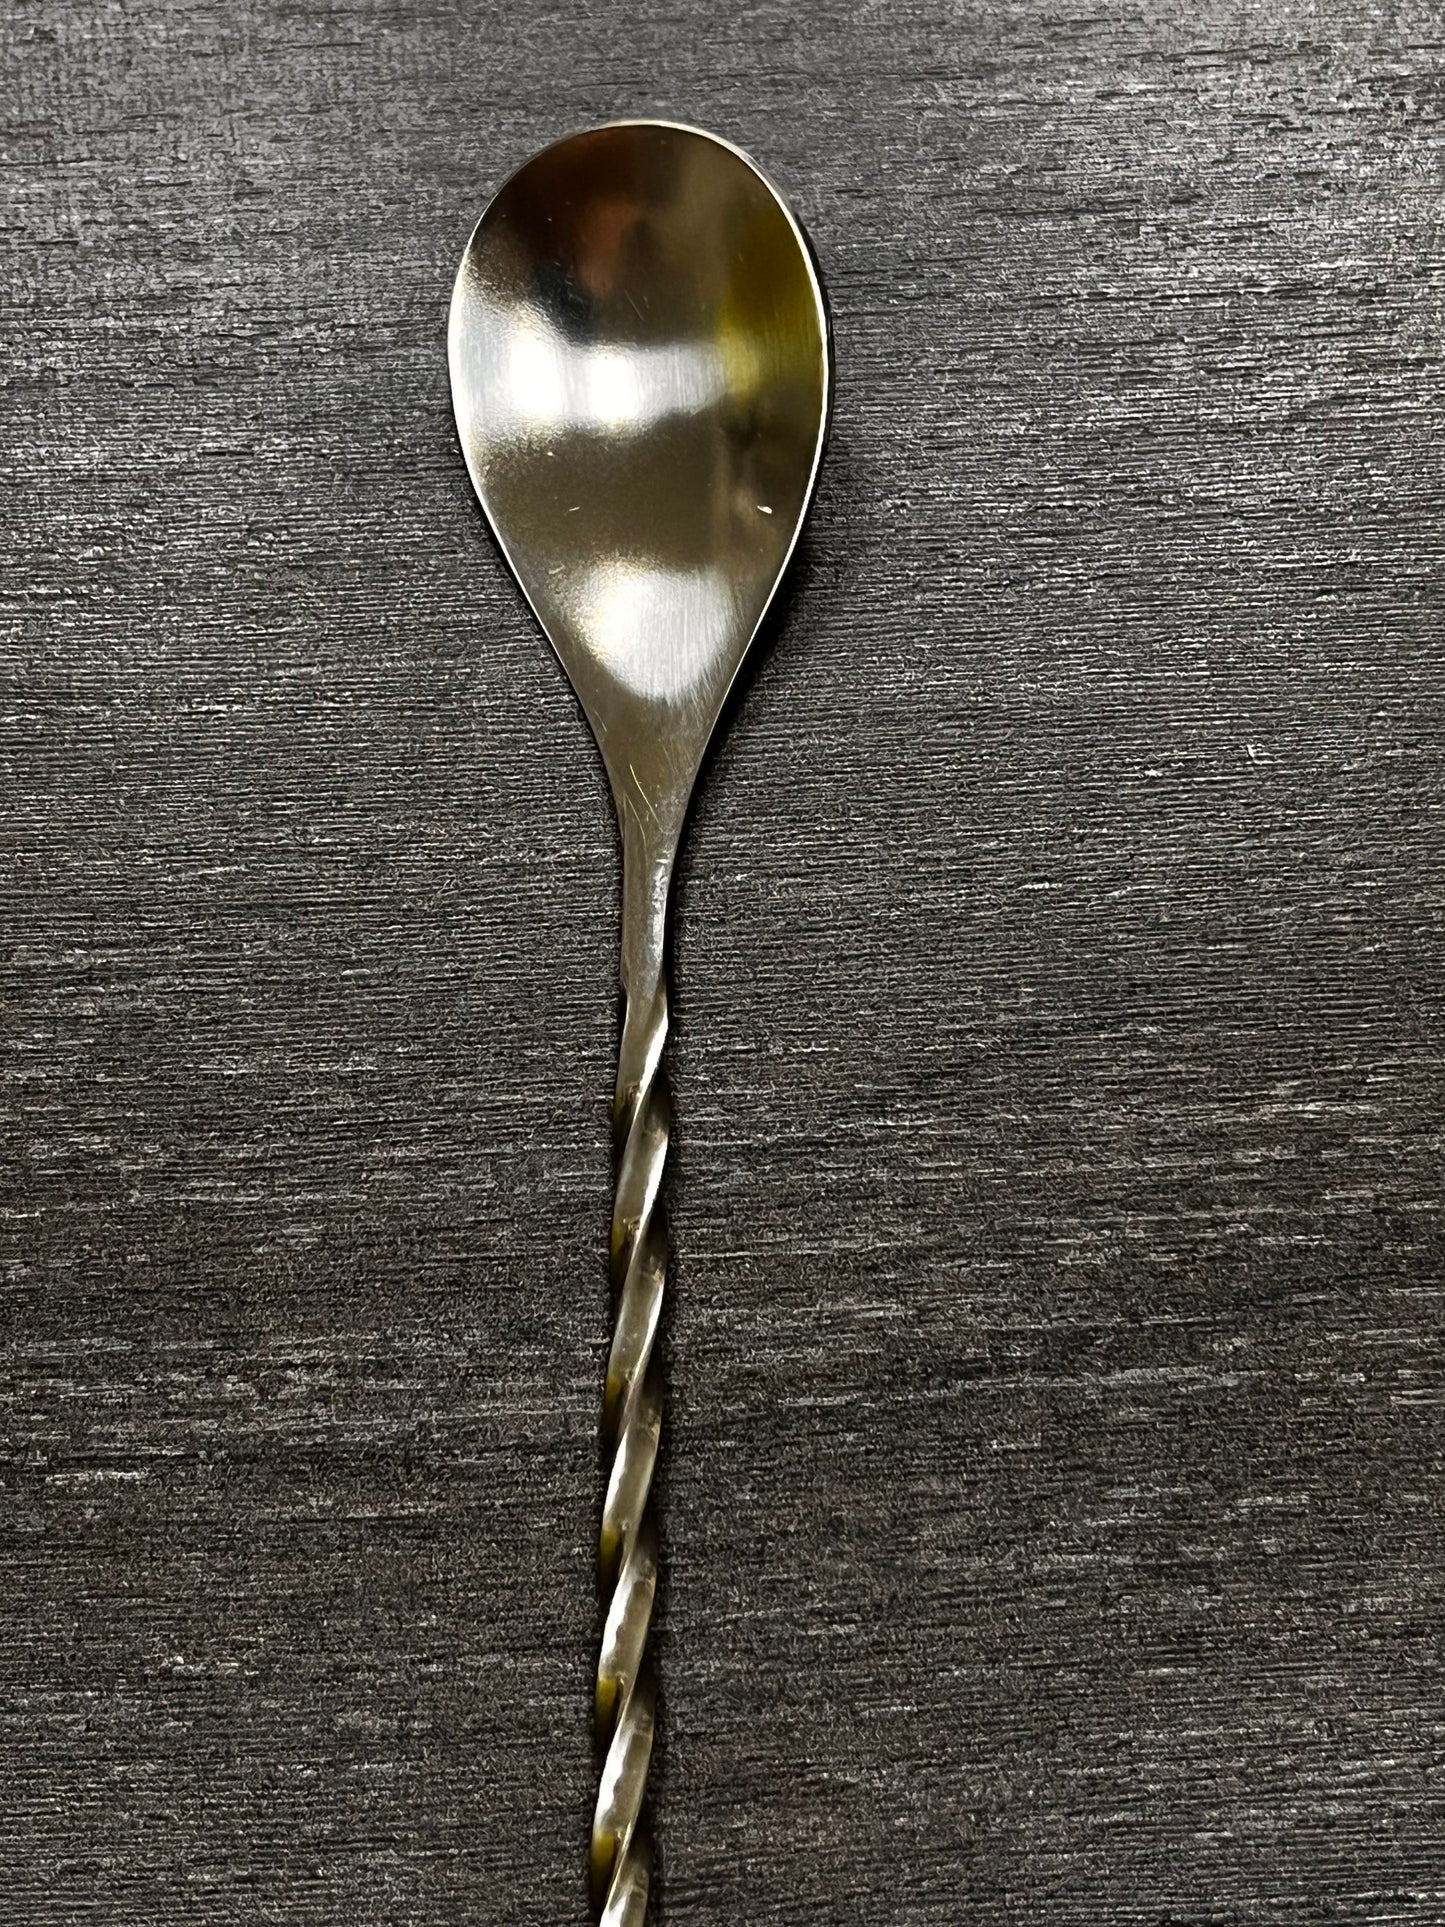 AnlarVo Stainless Steel Professional Weighted Bar Spoon, 15.75" length